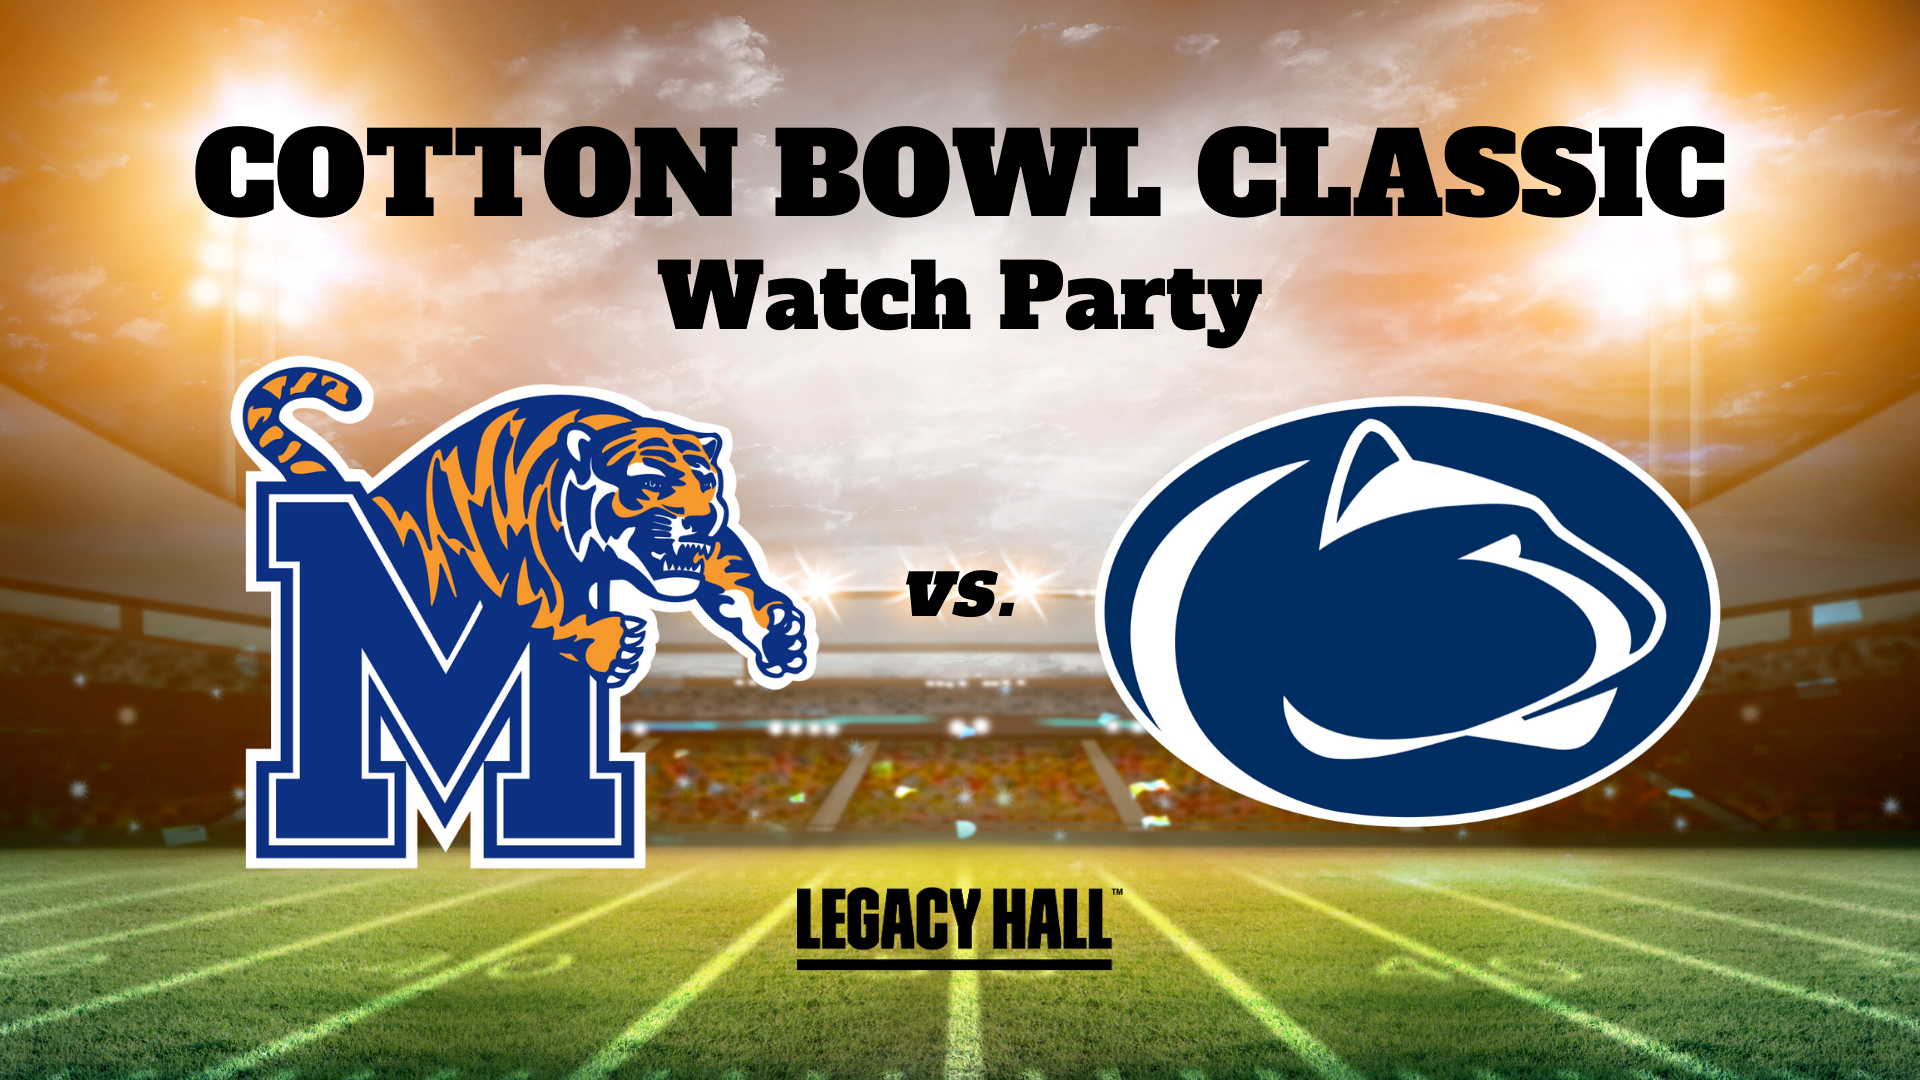 Cotton Bowl Classic Watch Party - hero